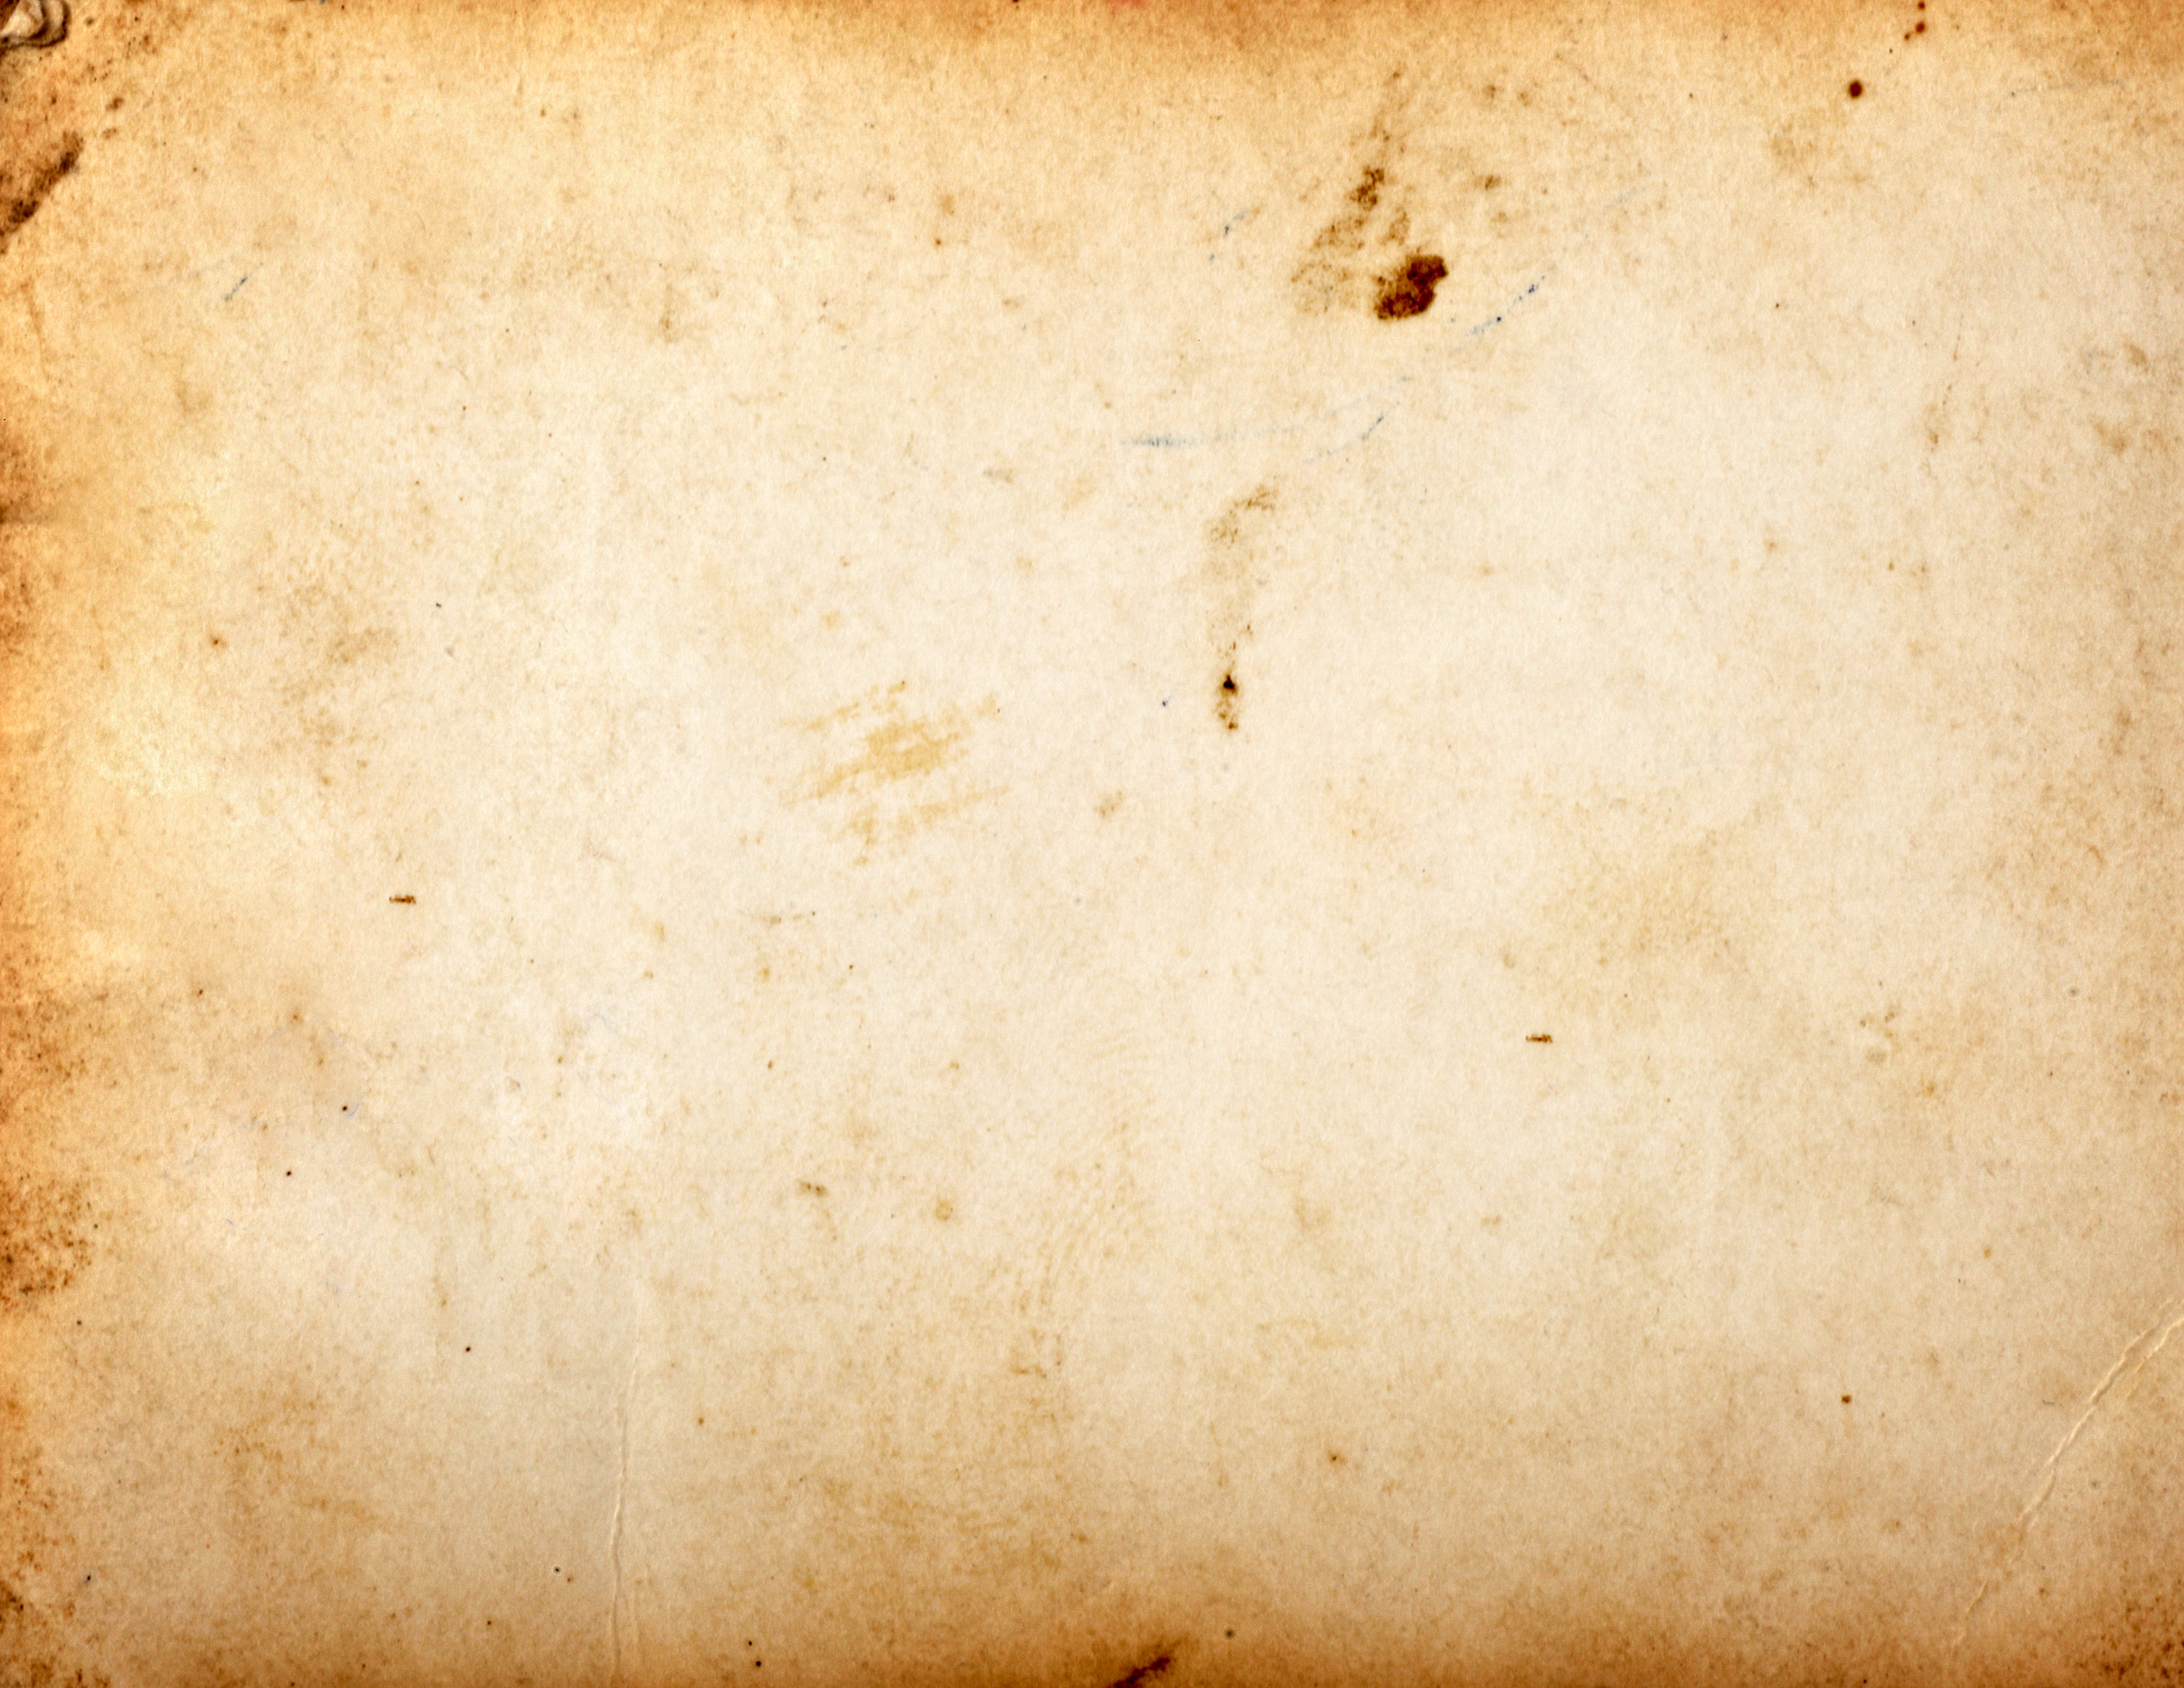 Western Leather Background HD Wallpapers on picsfaircom